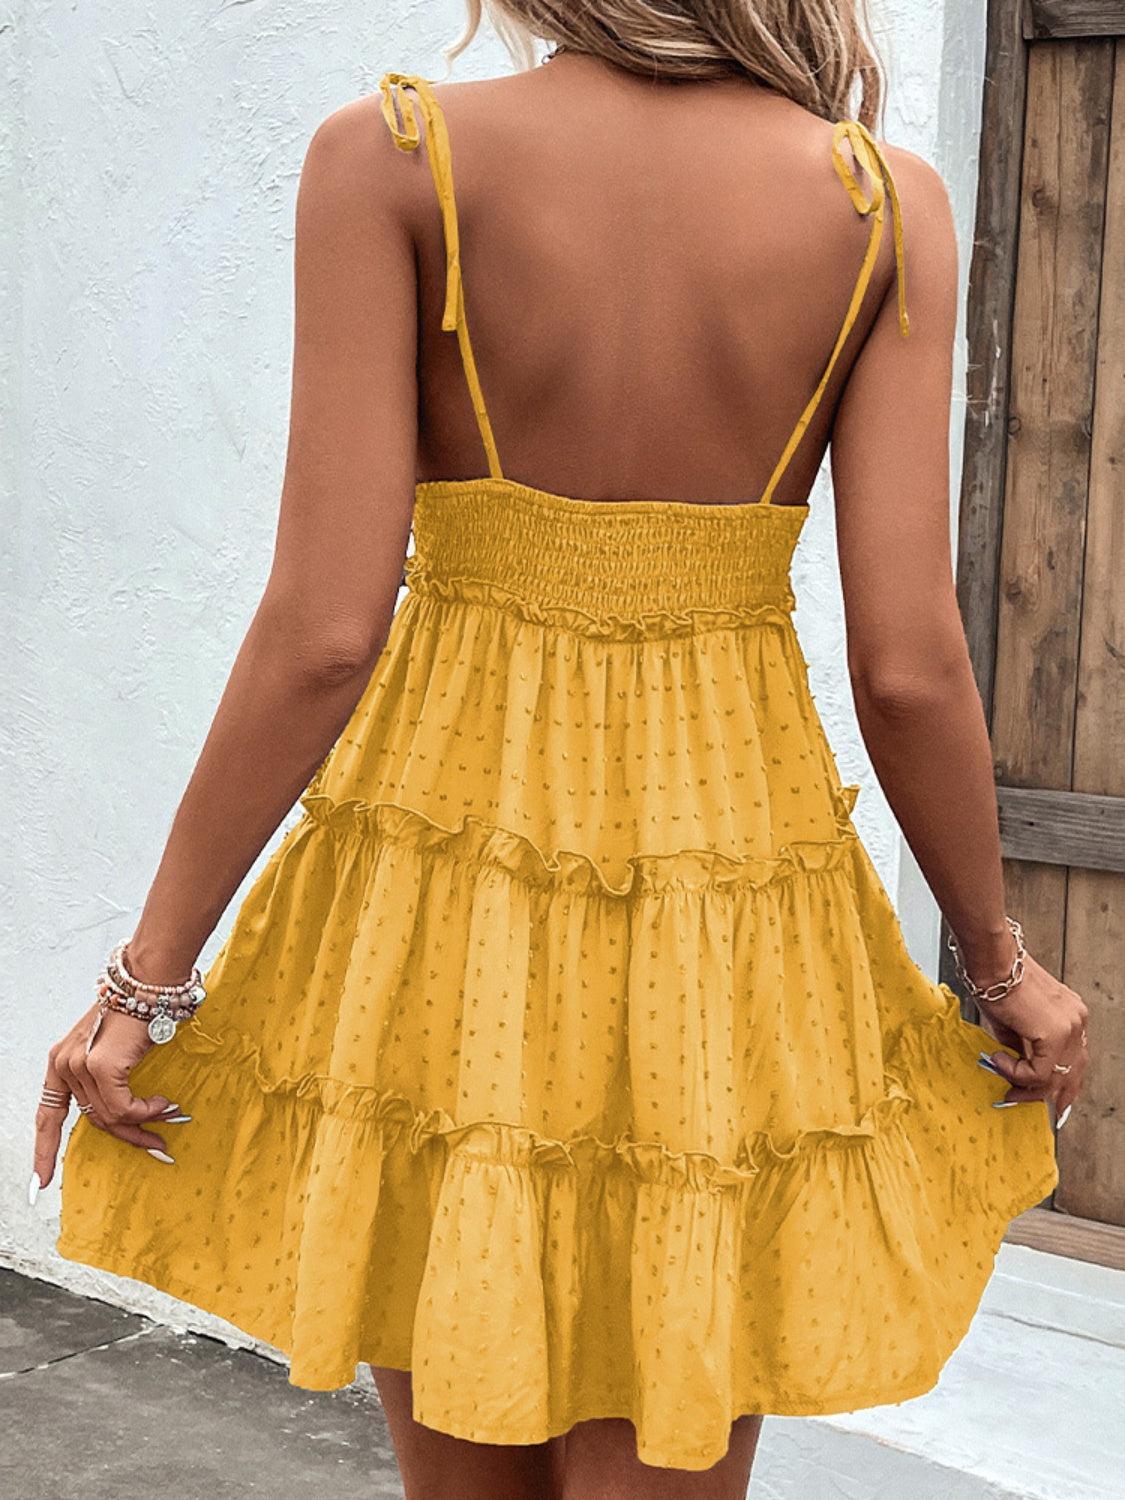 the back of a woman's yellow dress